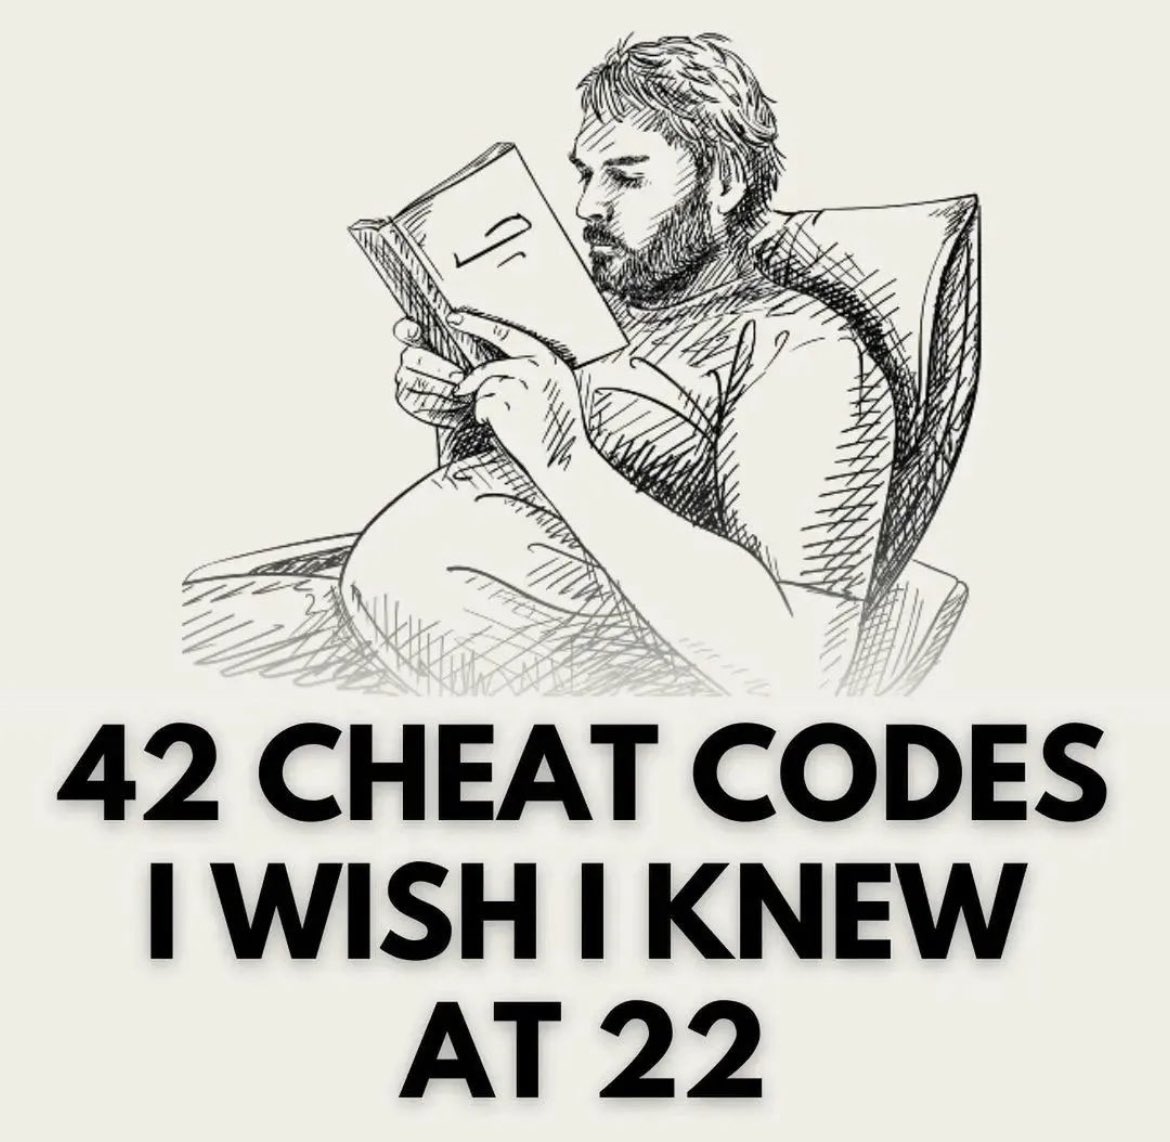 42 Cheat Codes You Wish You Knew Sooner.